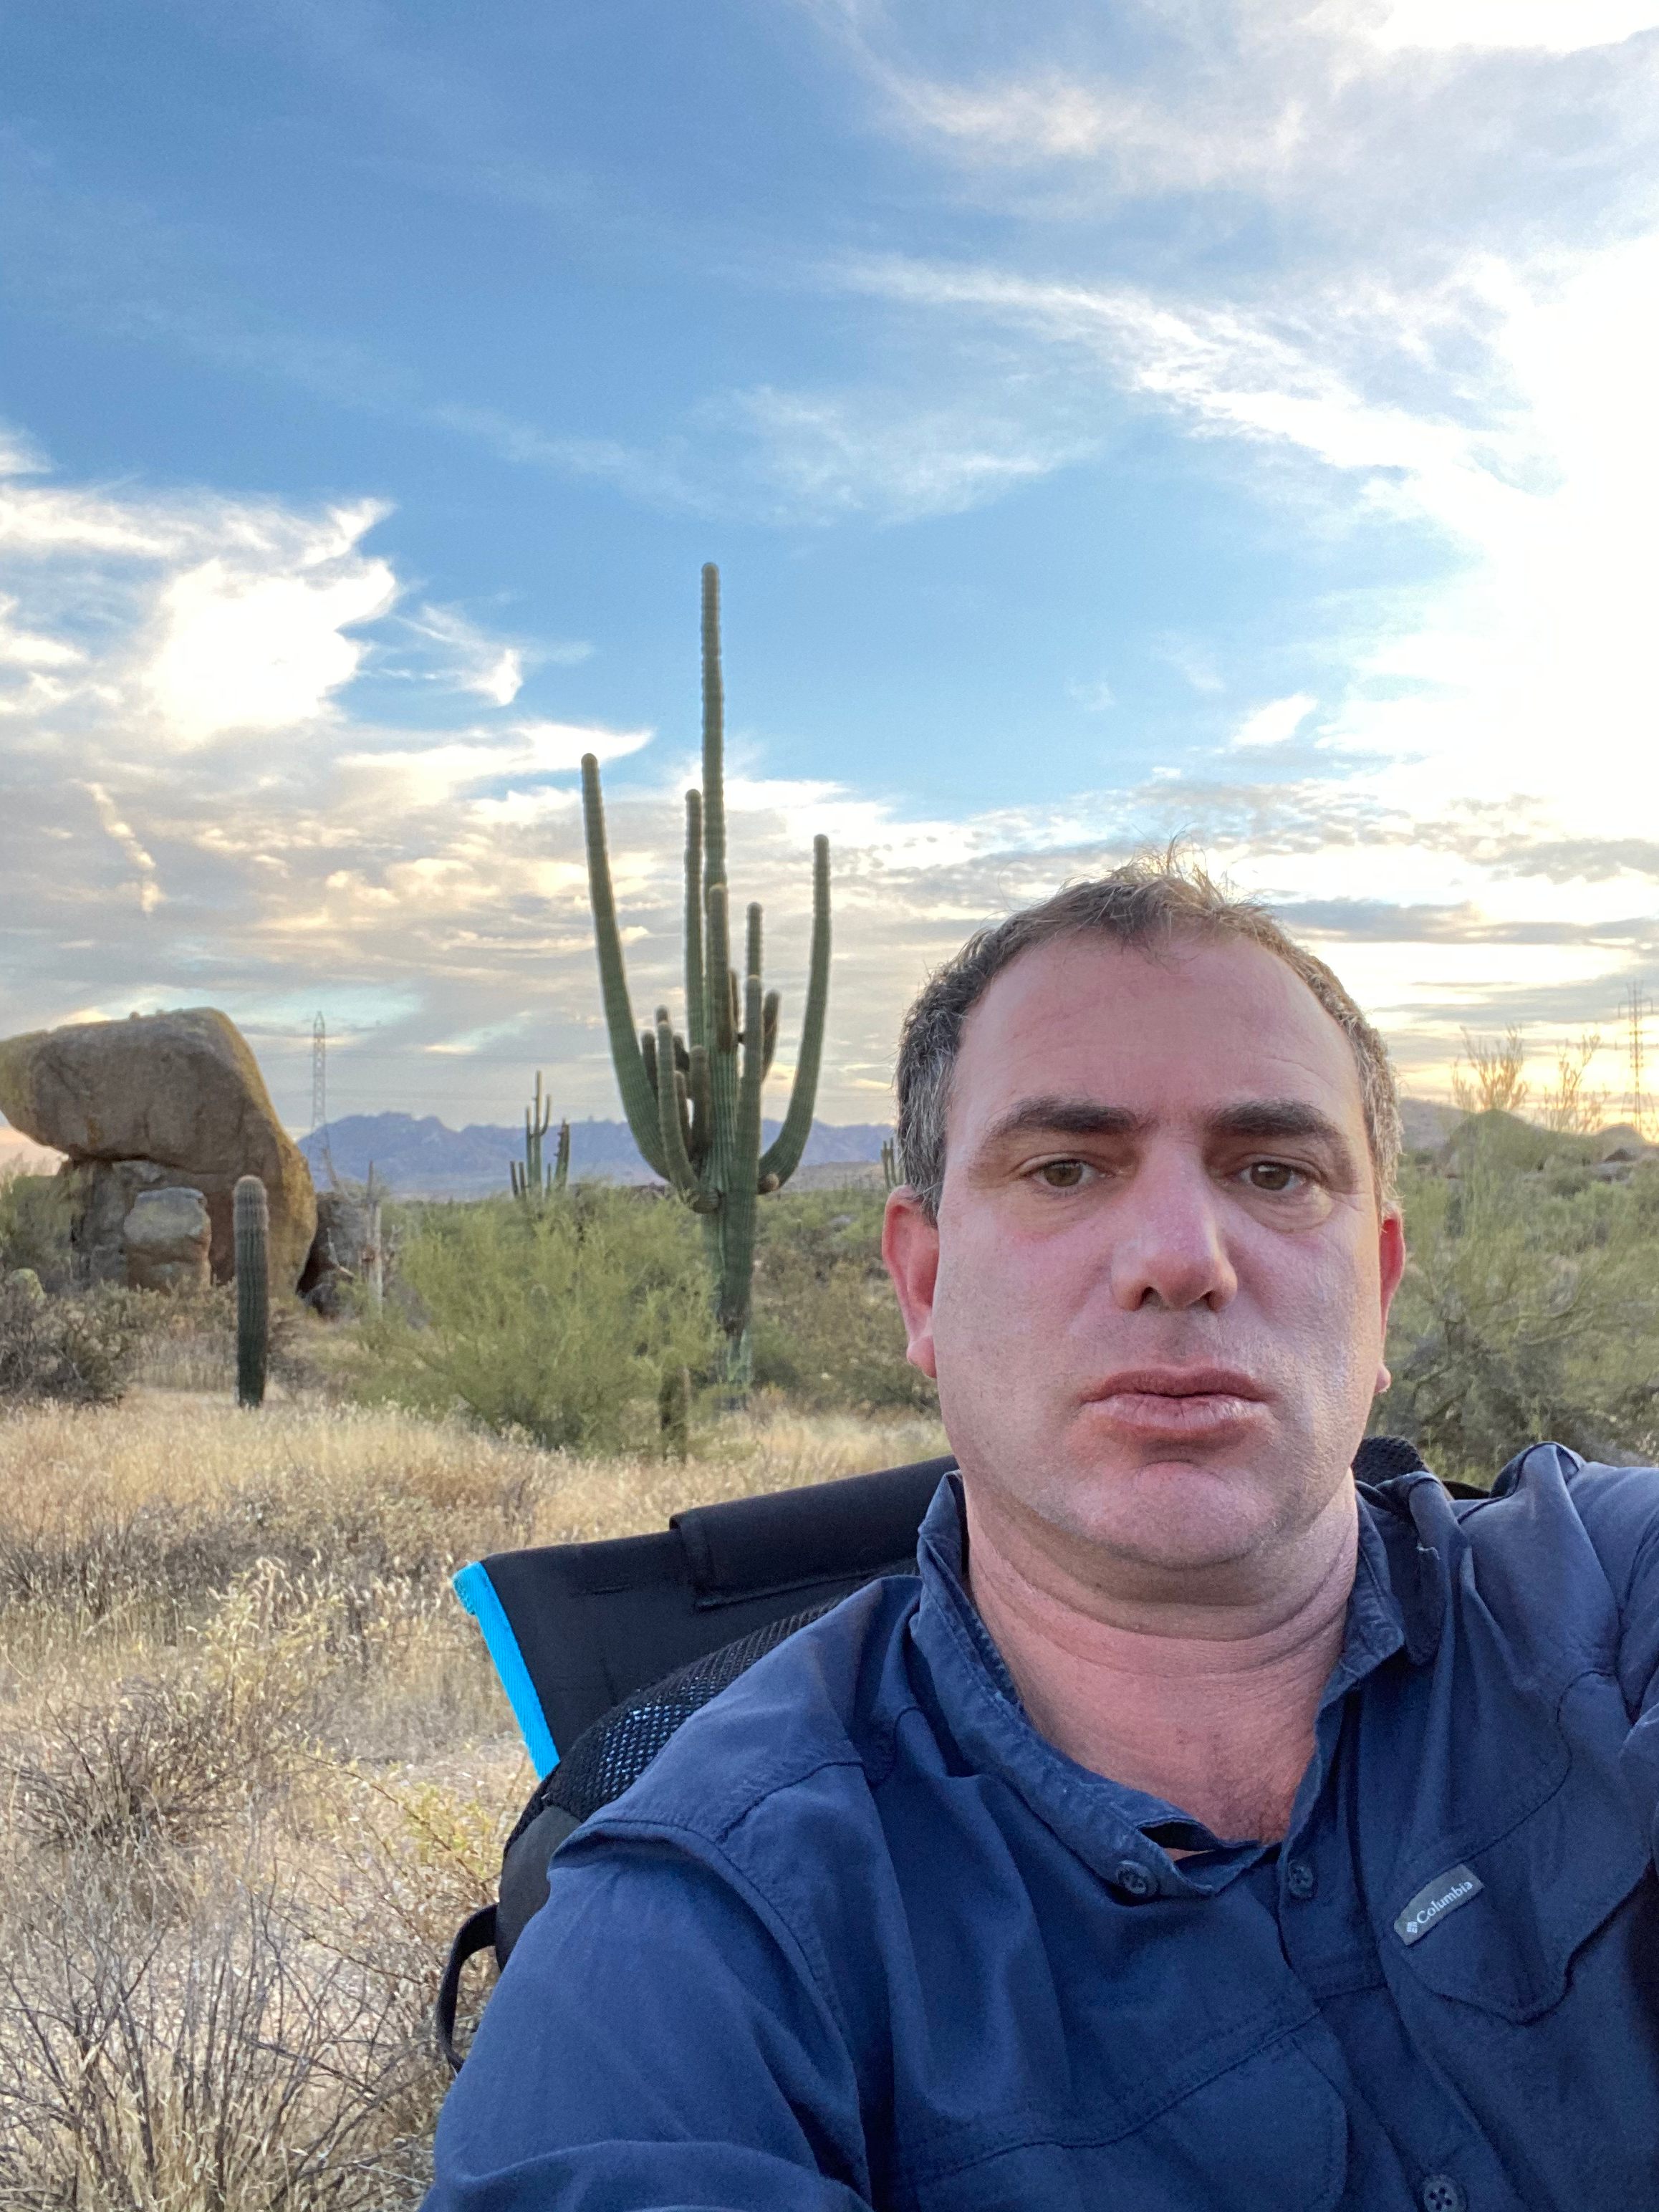 Flouting his own prohibition on digital devices while extreme sitting, Silk snaps a selfie as he sits in McDowell Mountain Regional Park in North Scottsdale, Arizona.